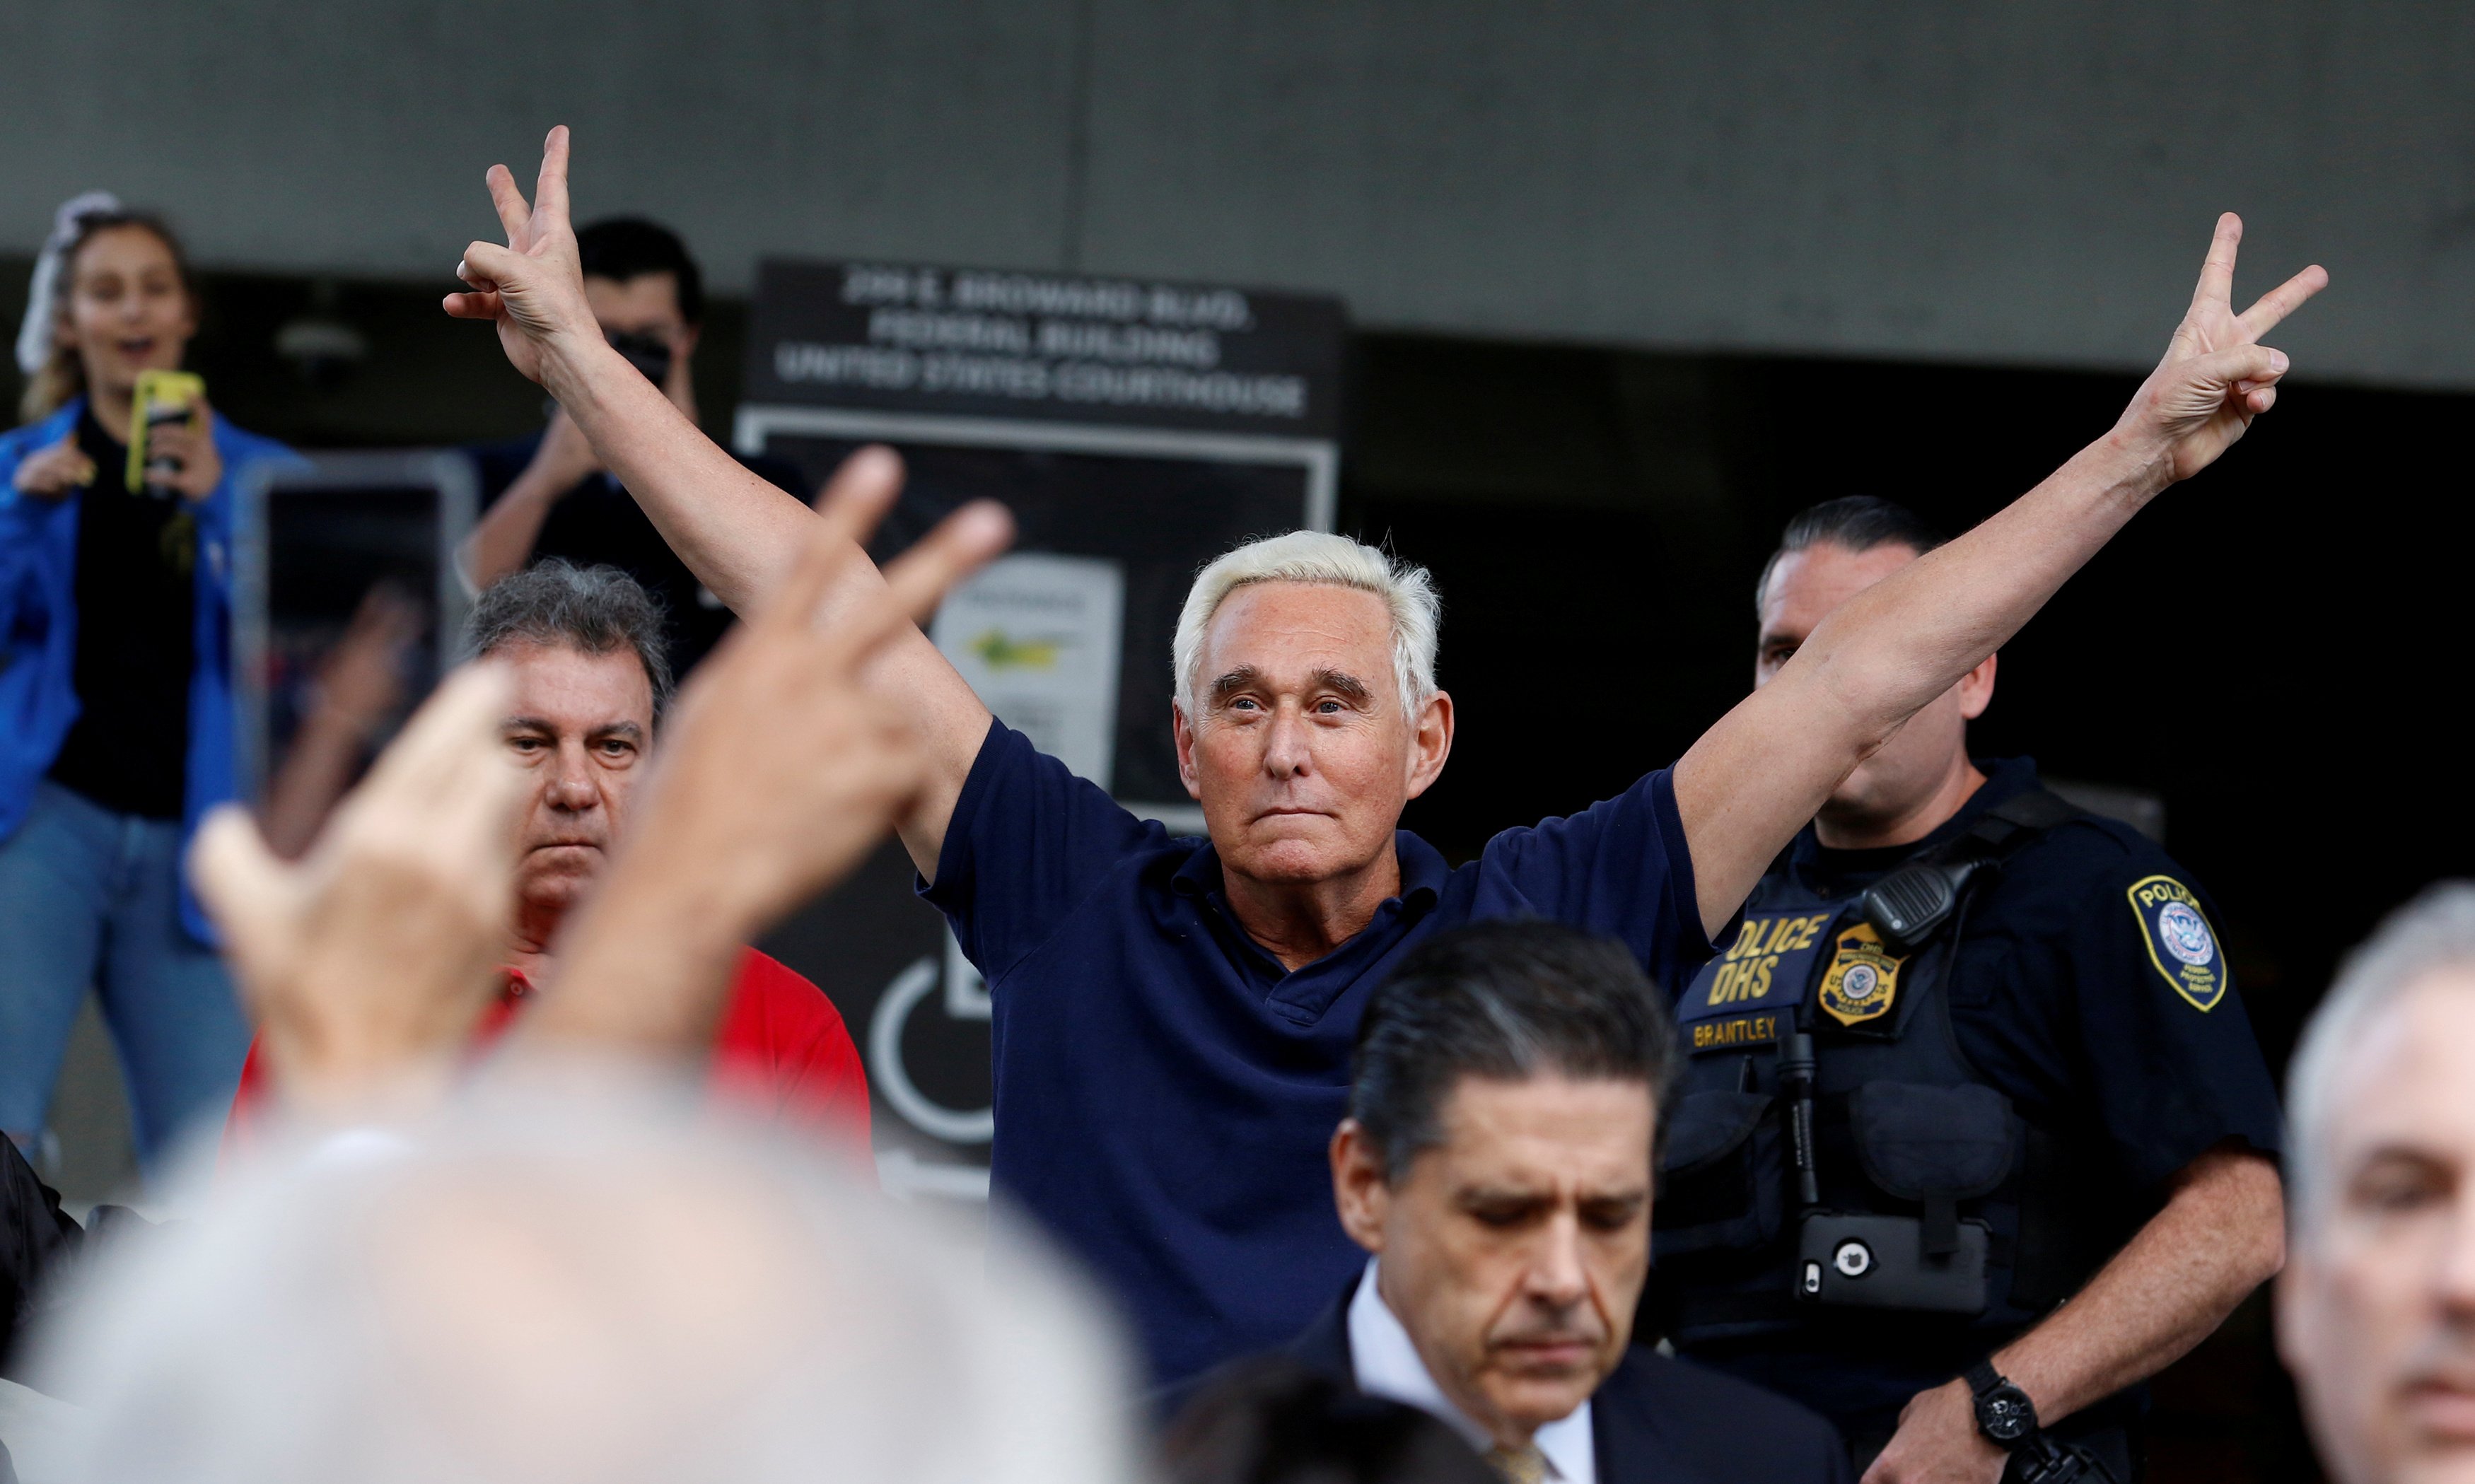 Roger Stone reacts as he walks to microphones after his appearance at Federal Court in Fort Lauderdale, Florida, U.S., January 25, 2019. REUTERS/Joe Skipper 